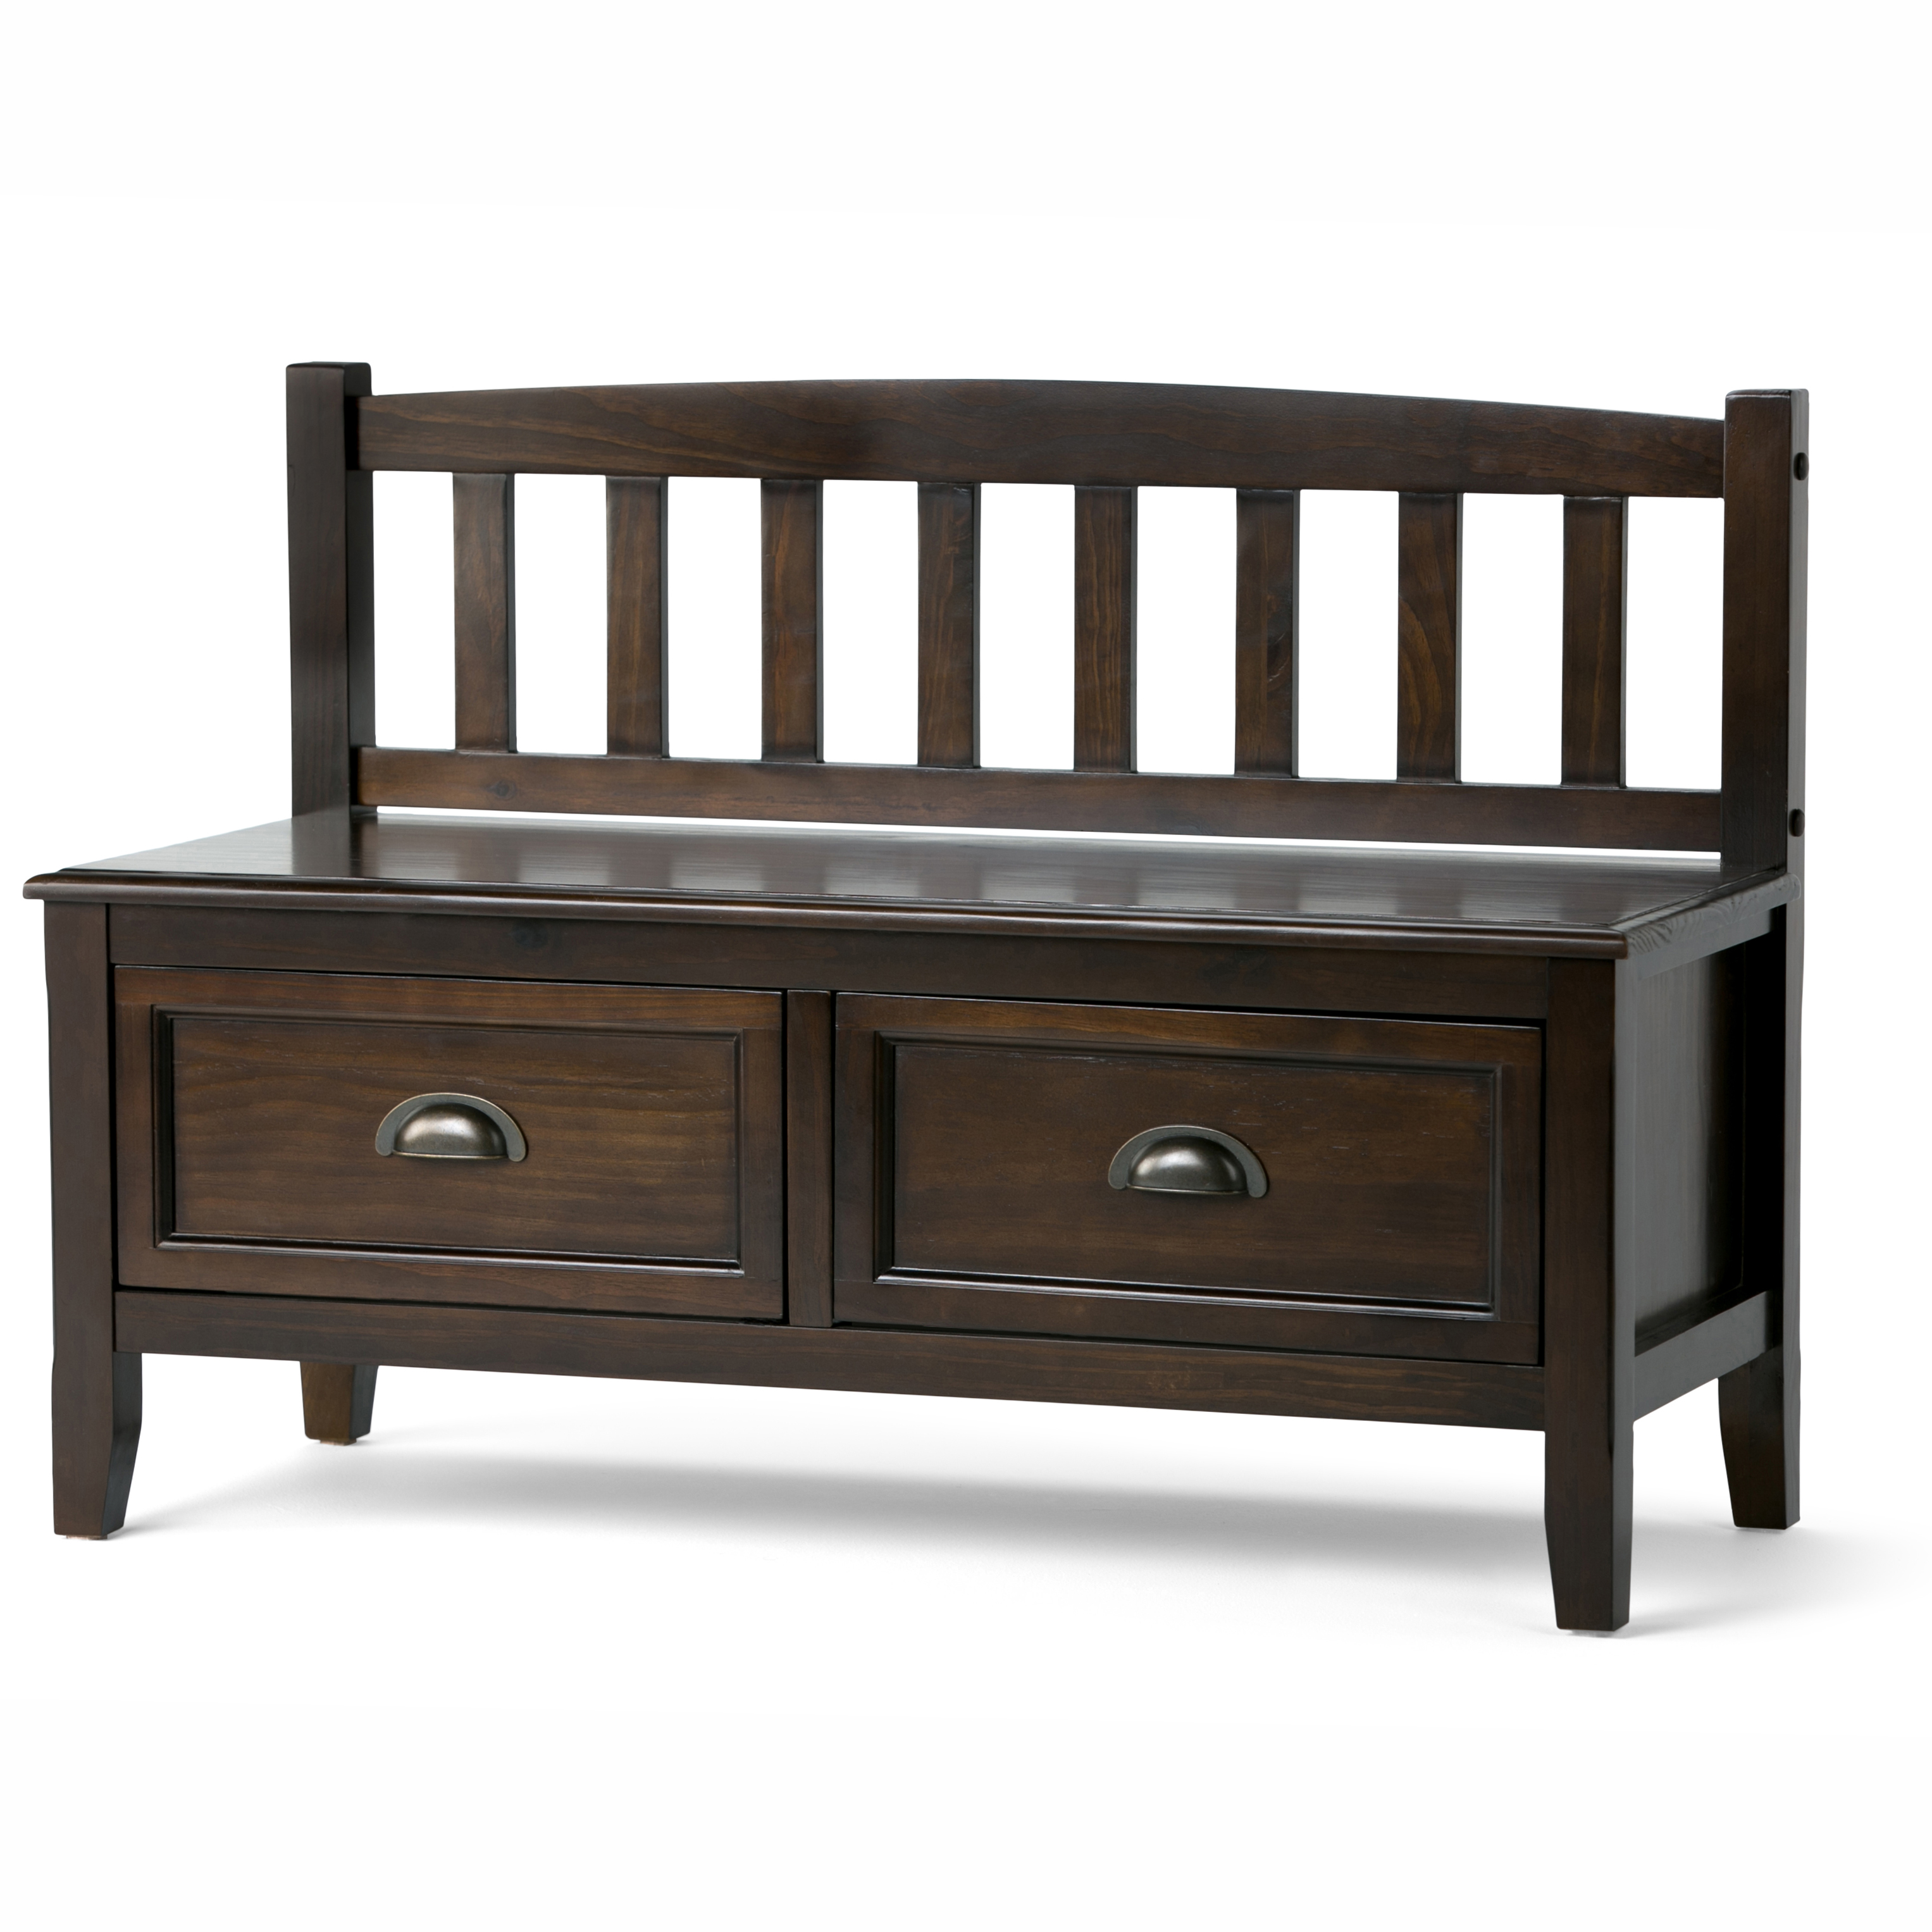 Simpli Home Burlington SOLID WOOD 42 inch Wide Transitional Entryway Storage Bench with Drawers in Mahogany Brown